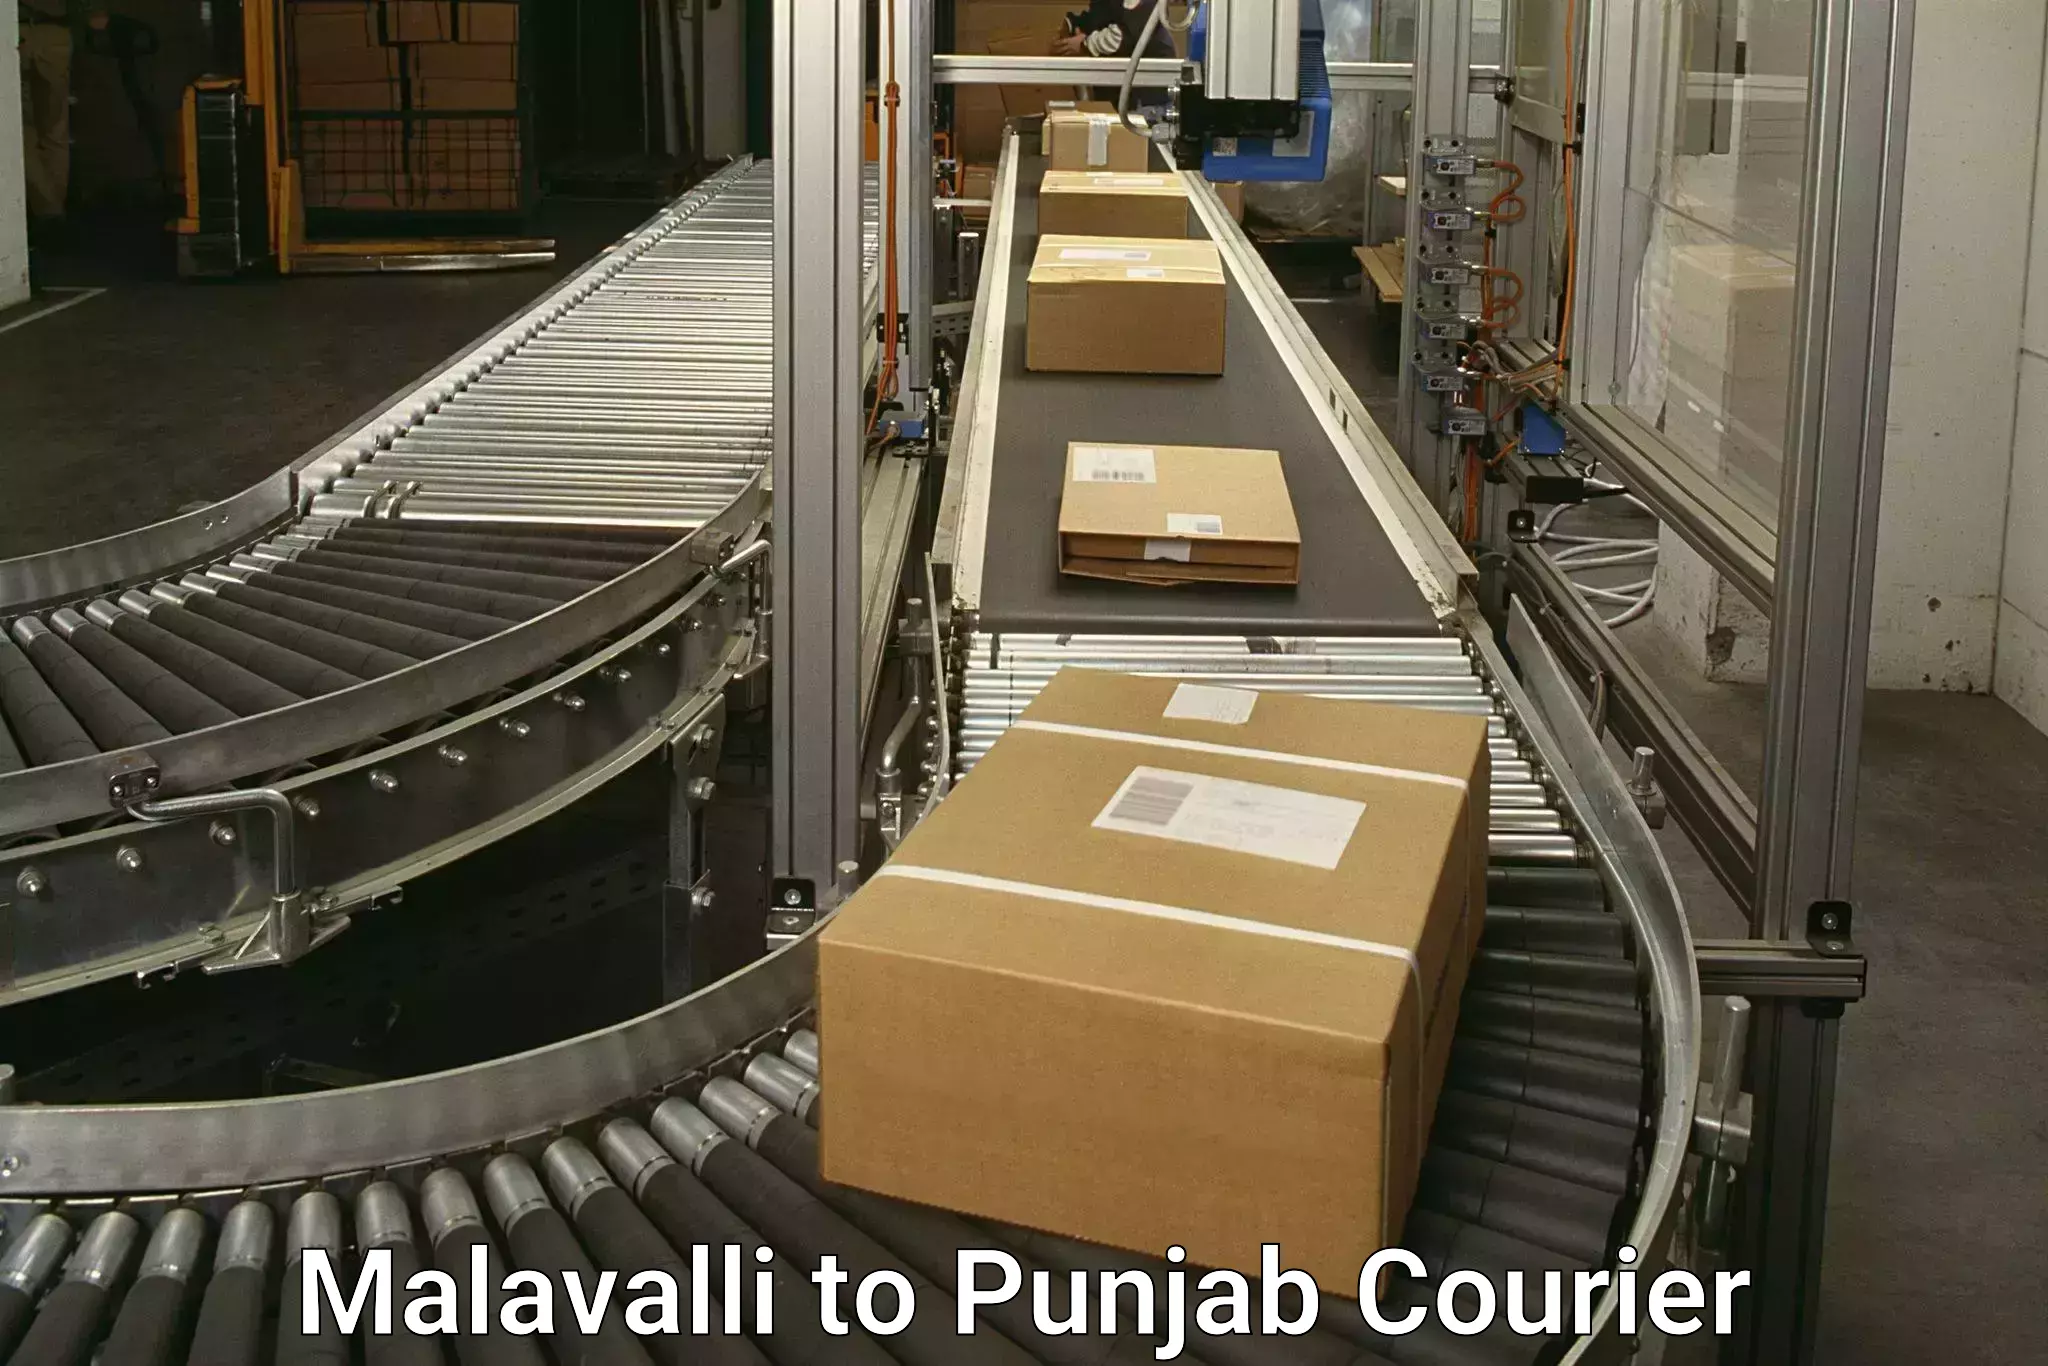 Overnight delivery services Malavalli to Talwandi Sabo